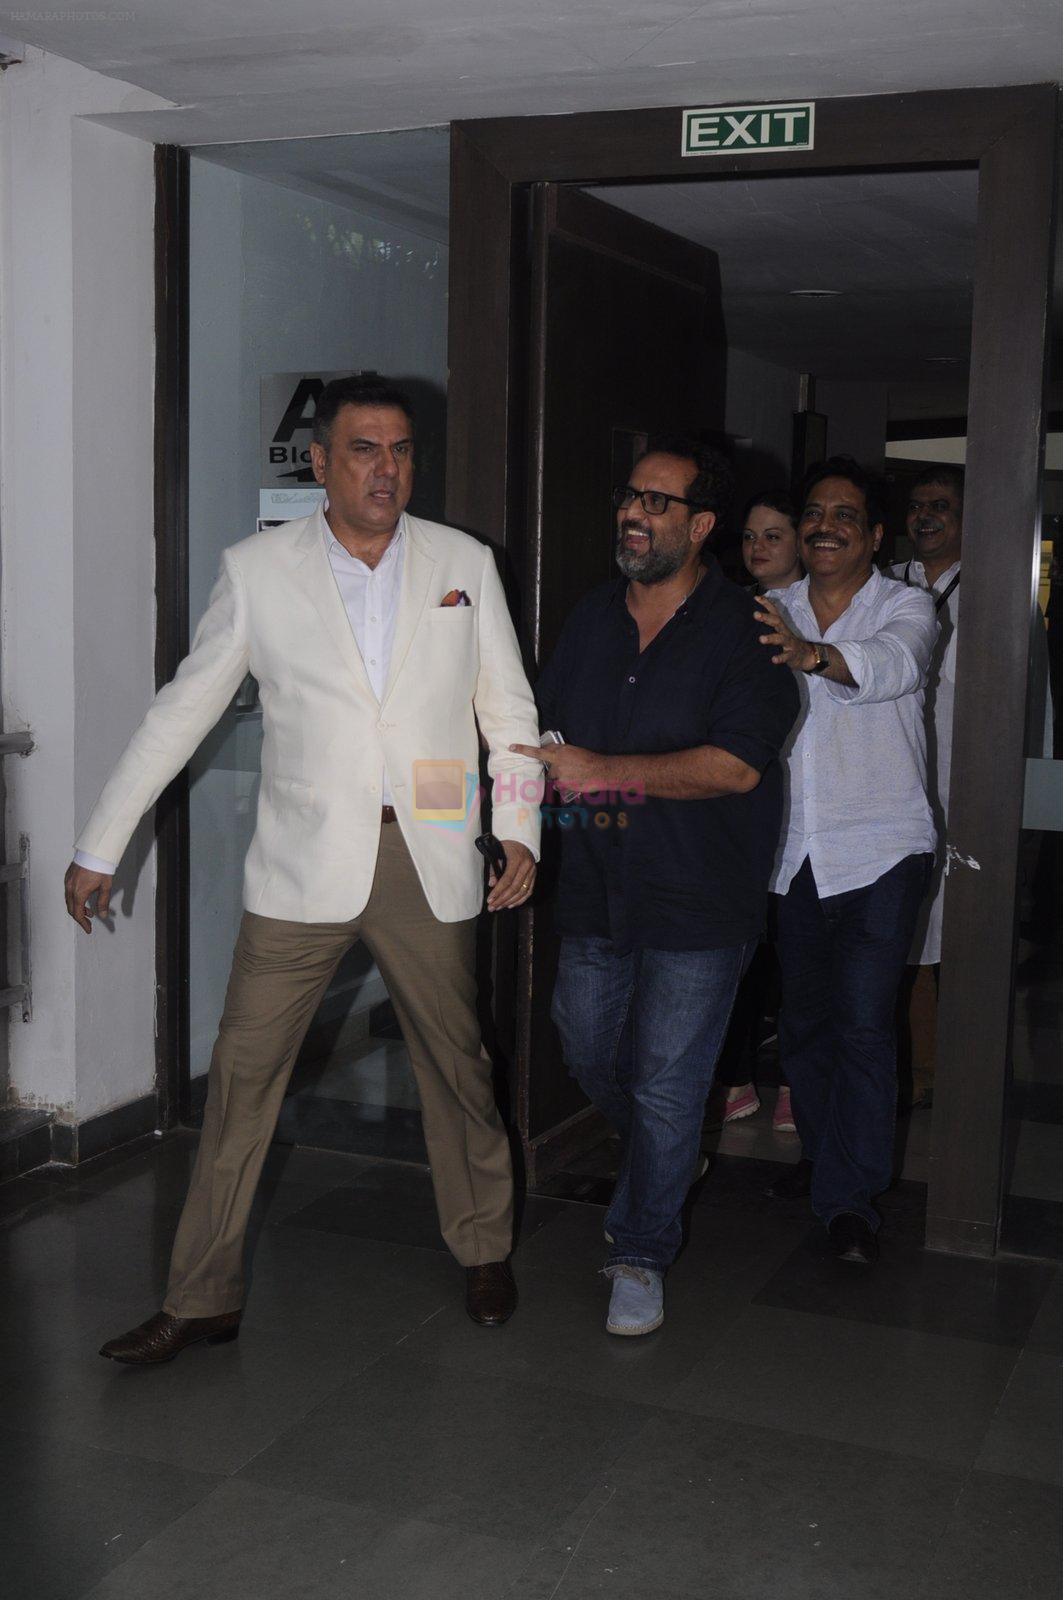 Boman Irani at whistling woods on 29th Sept 2016